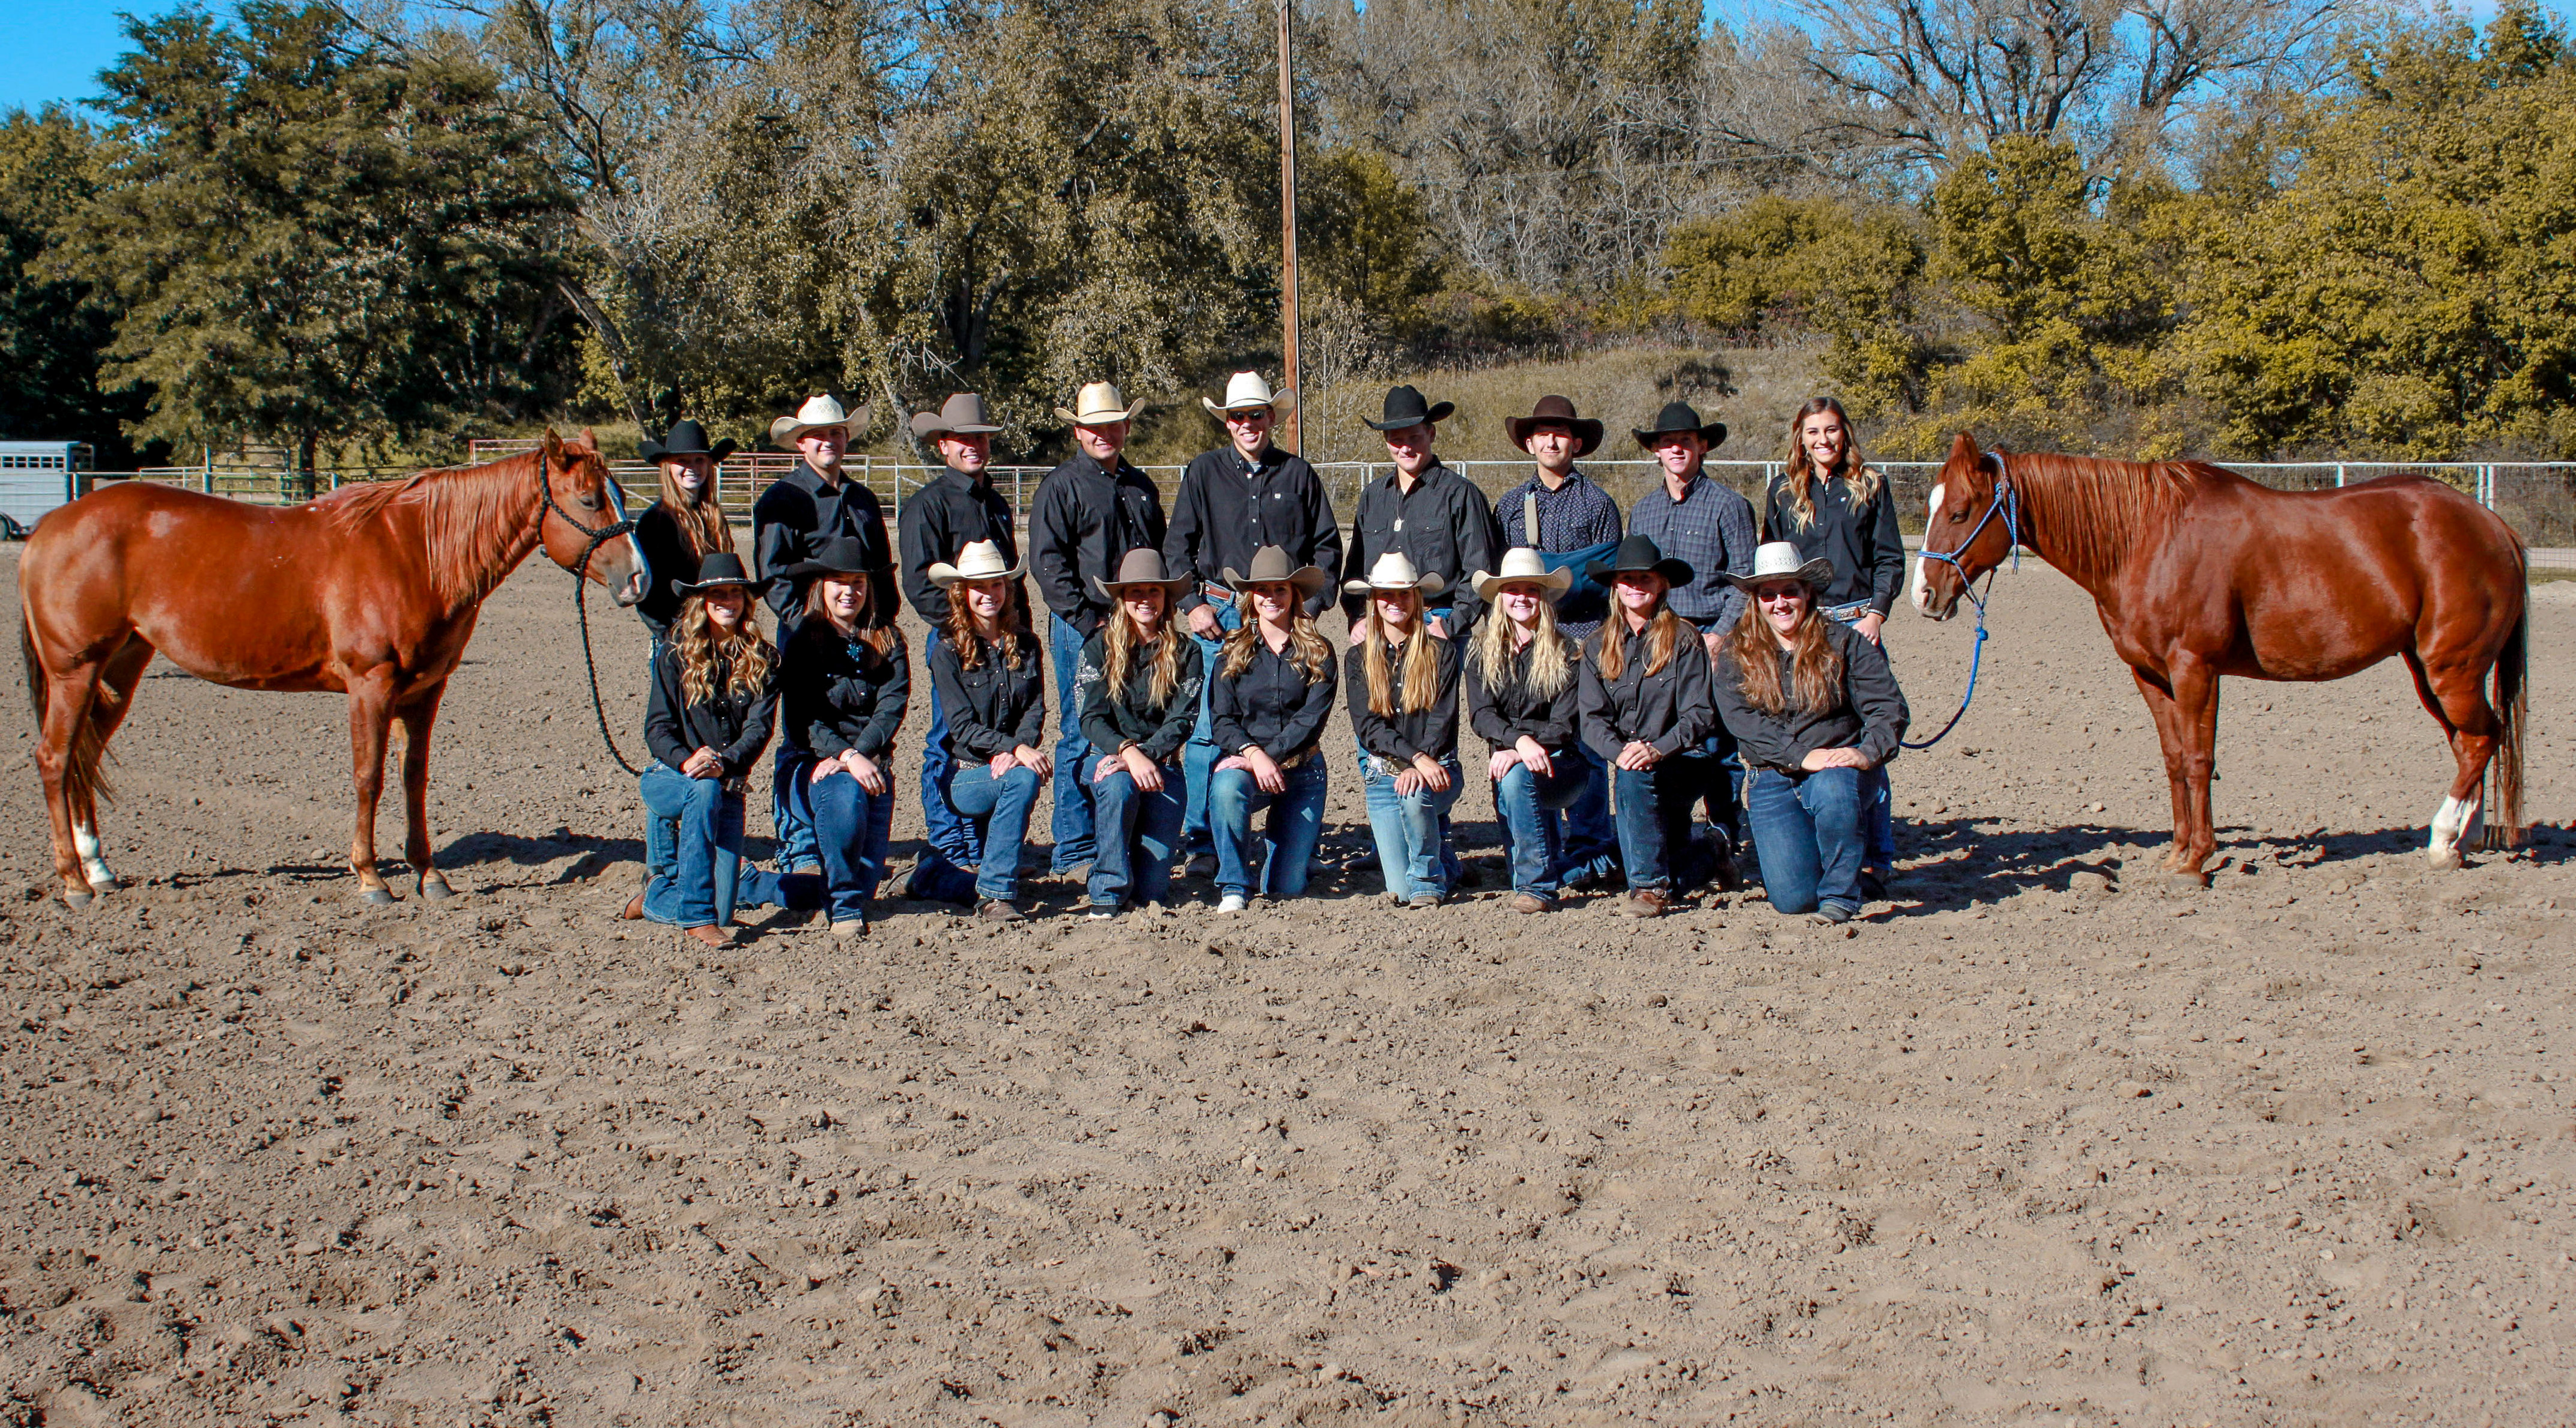 NCTA Aggie Rodeo Club includes competitive athletes on the traveling team and supporting members. They compete in Ames, Iowa this weekend. (Photo by Tori Rossenbach)